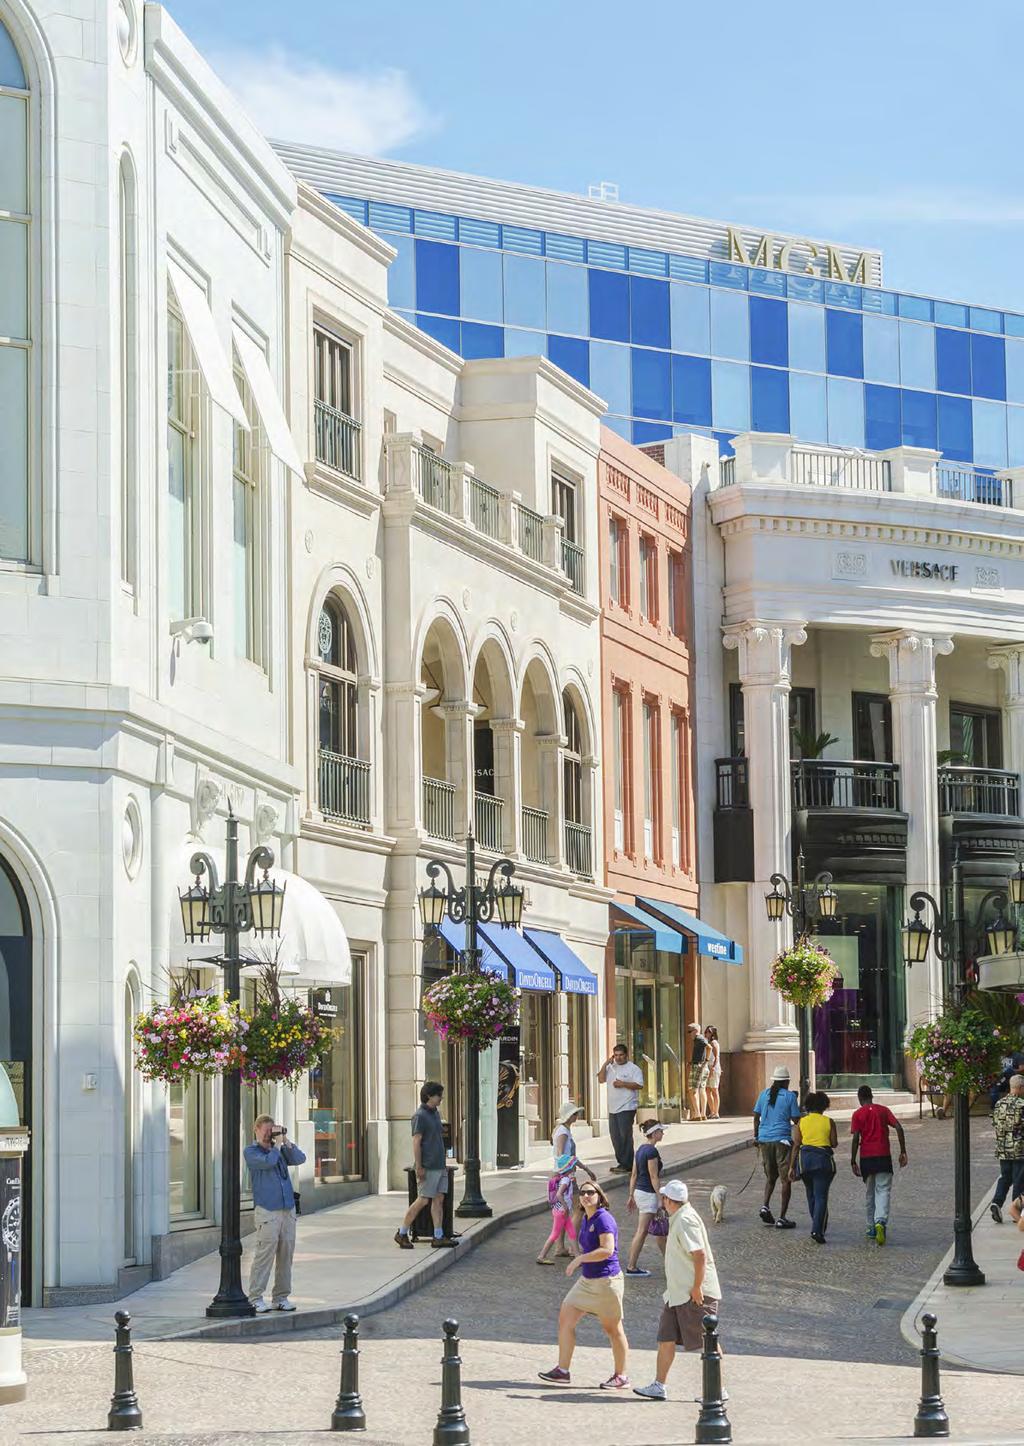 Mature Retail Cities Rank 22 Miami International retailers aiming to expand their retail footprint beyond Global Retail Cities often target Mature Retail Cities as the next port of call, in order to